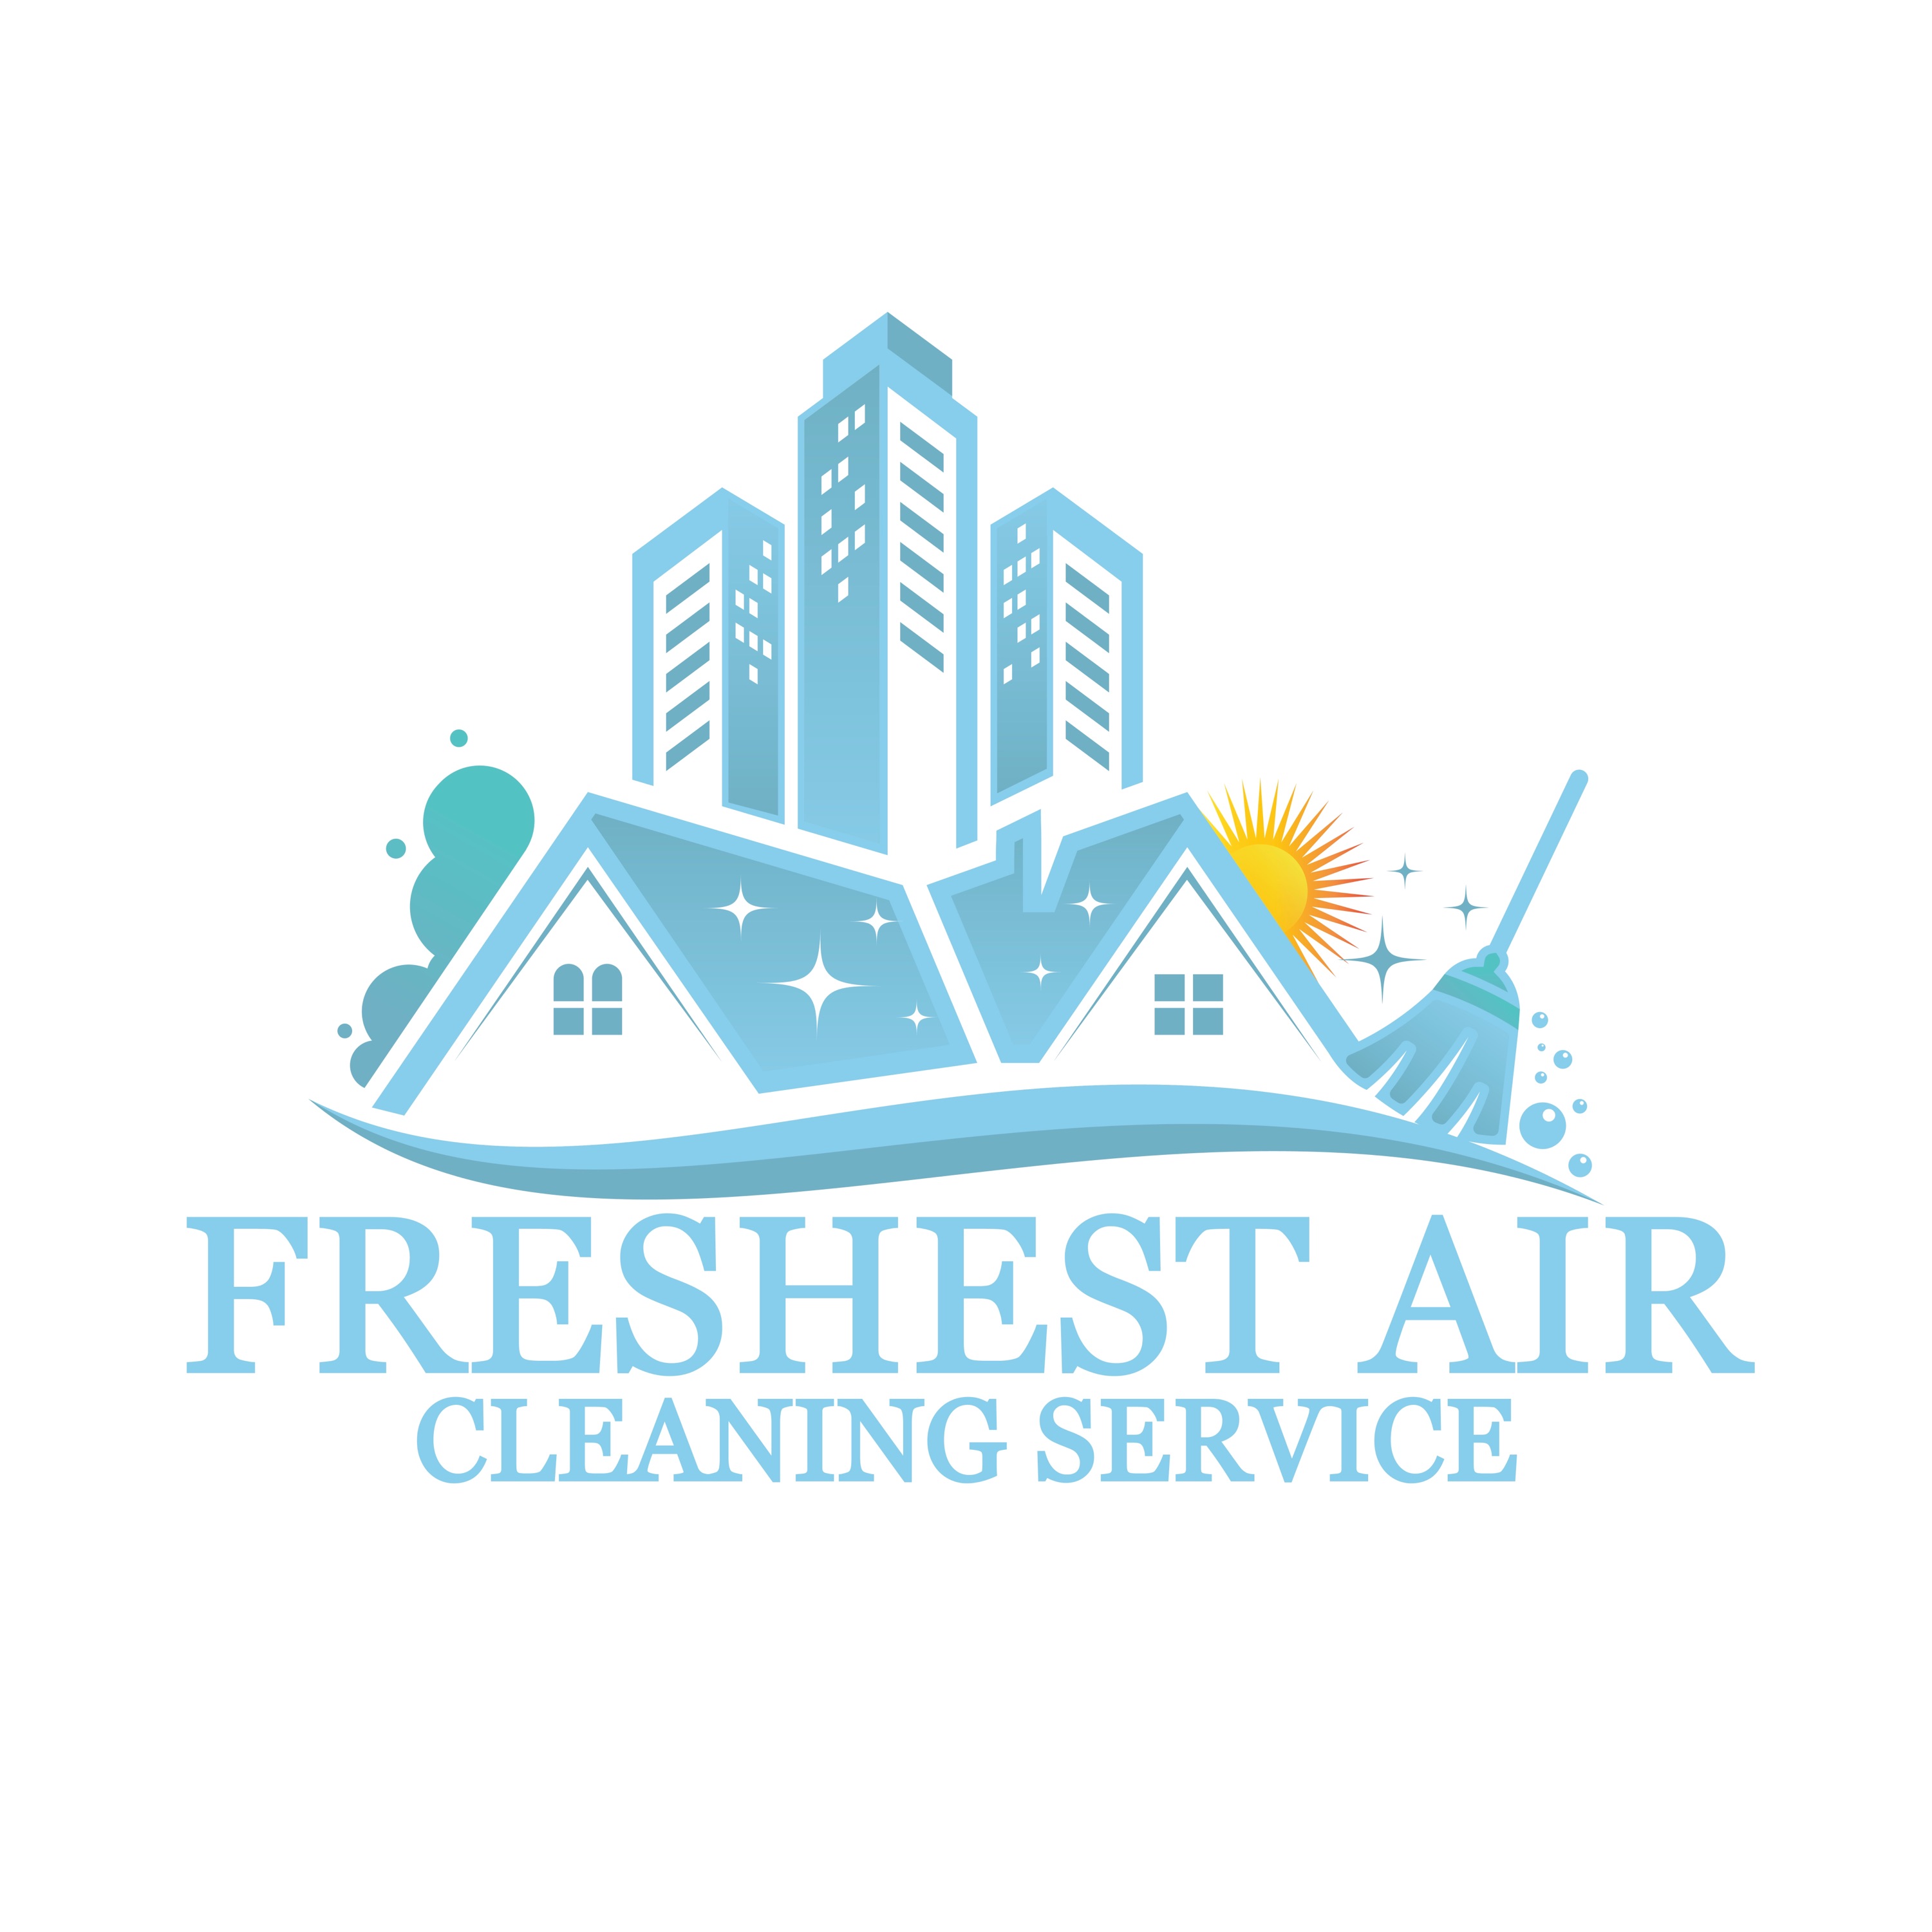 Freshest Air Cleaning Service Logo